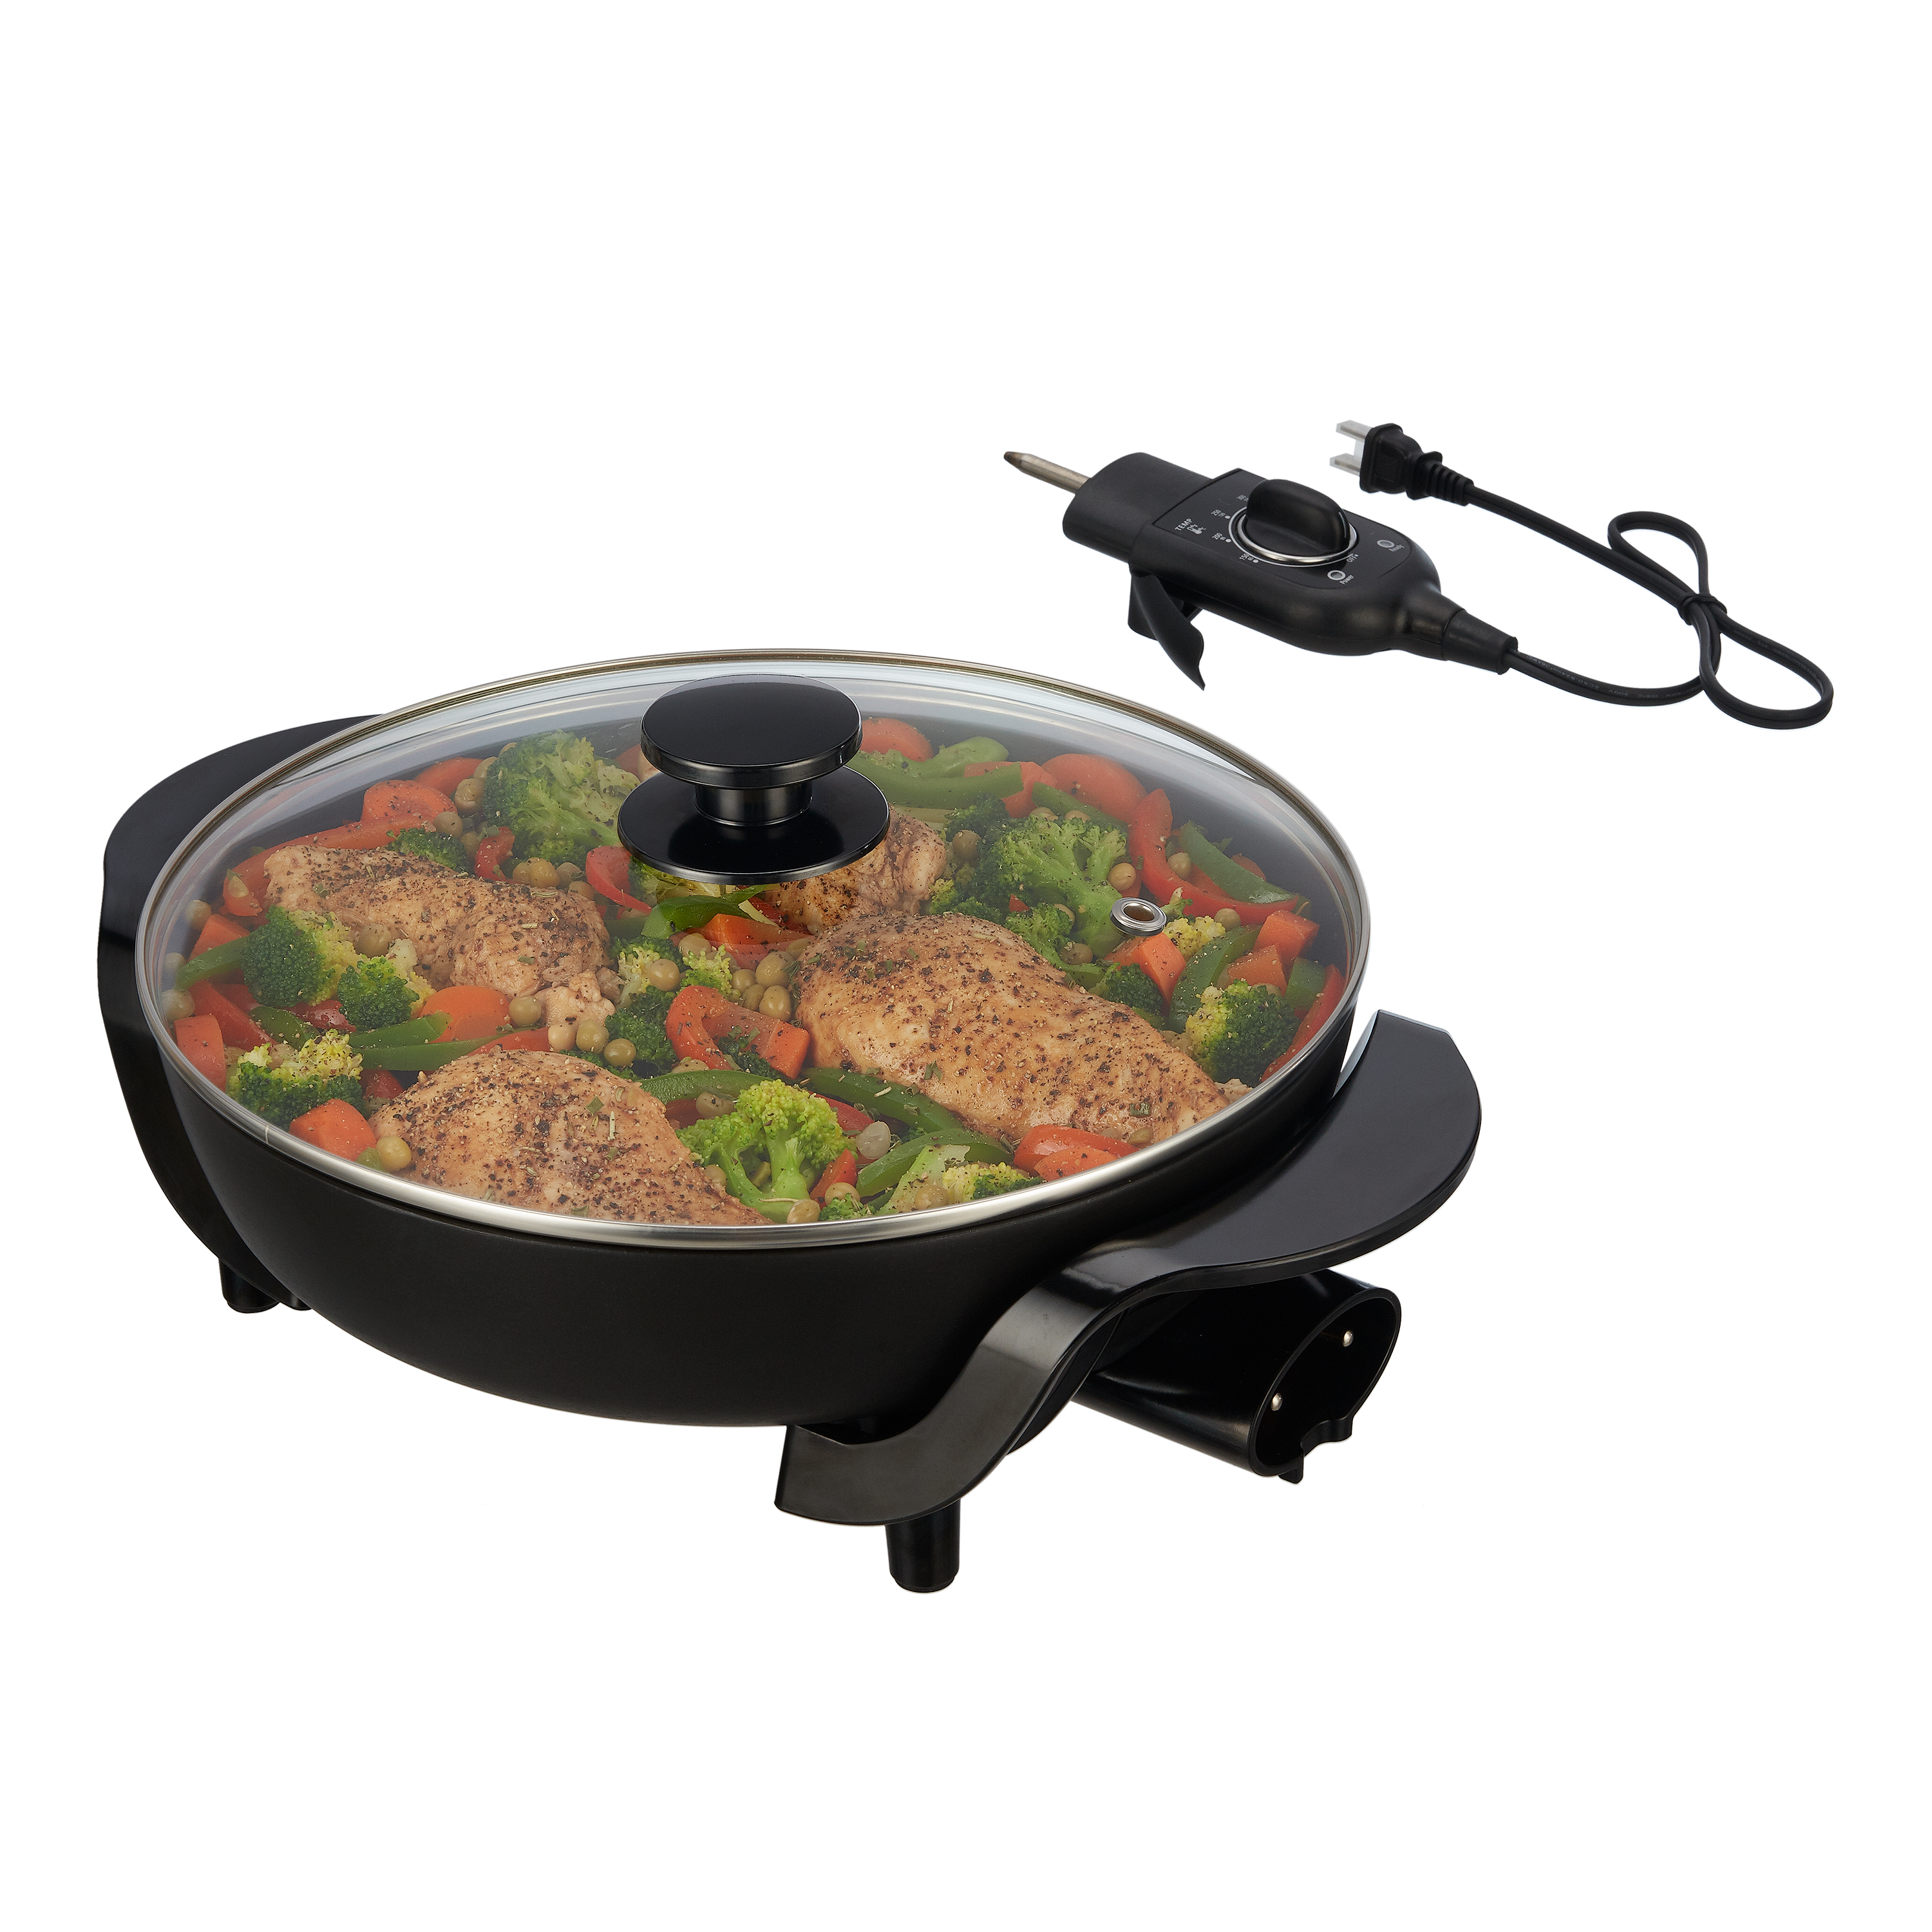 Mainstays 12" Round Nonstick Electric Skillet with Tempered Glass Cover, Mainstays Black - image 2 of 4